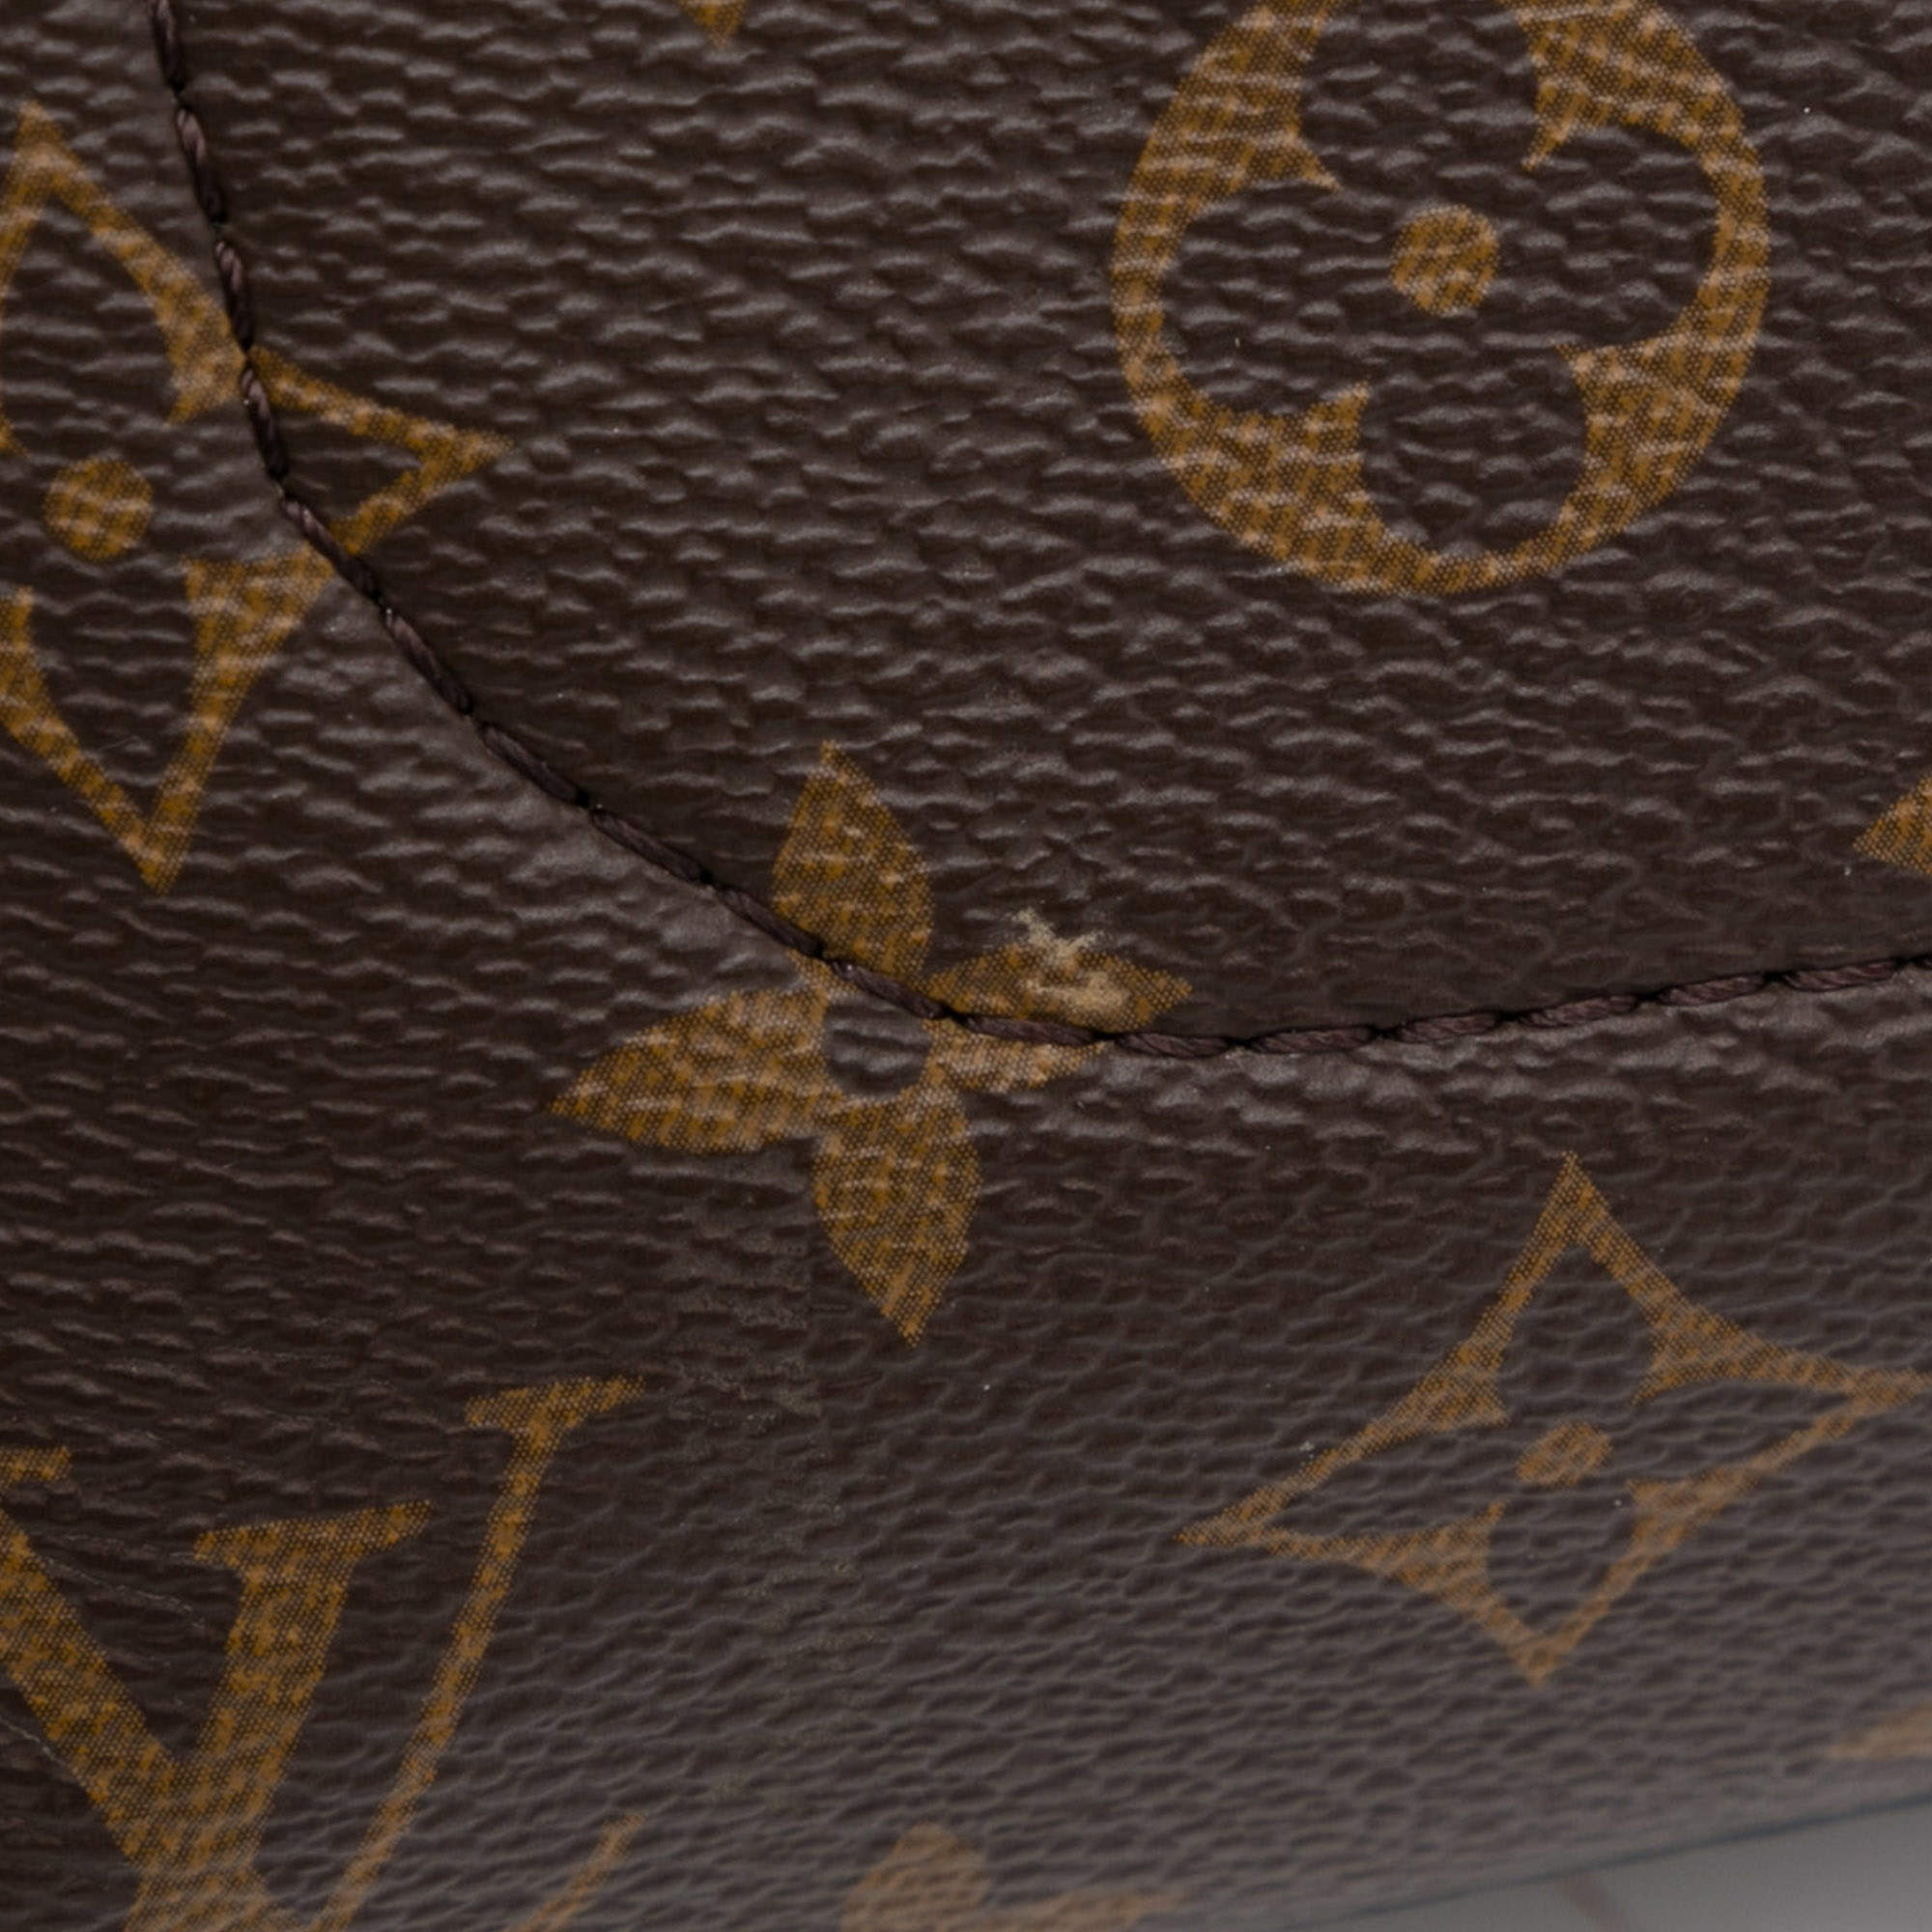 Flower tote leather handbag Louis Vuitton Brown in Leather - 31493505